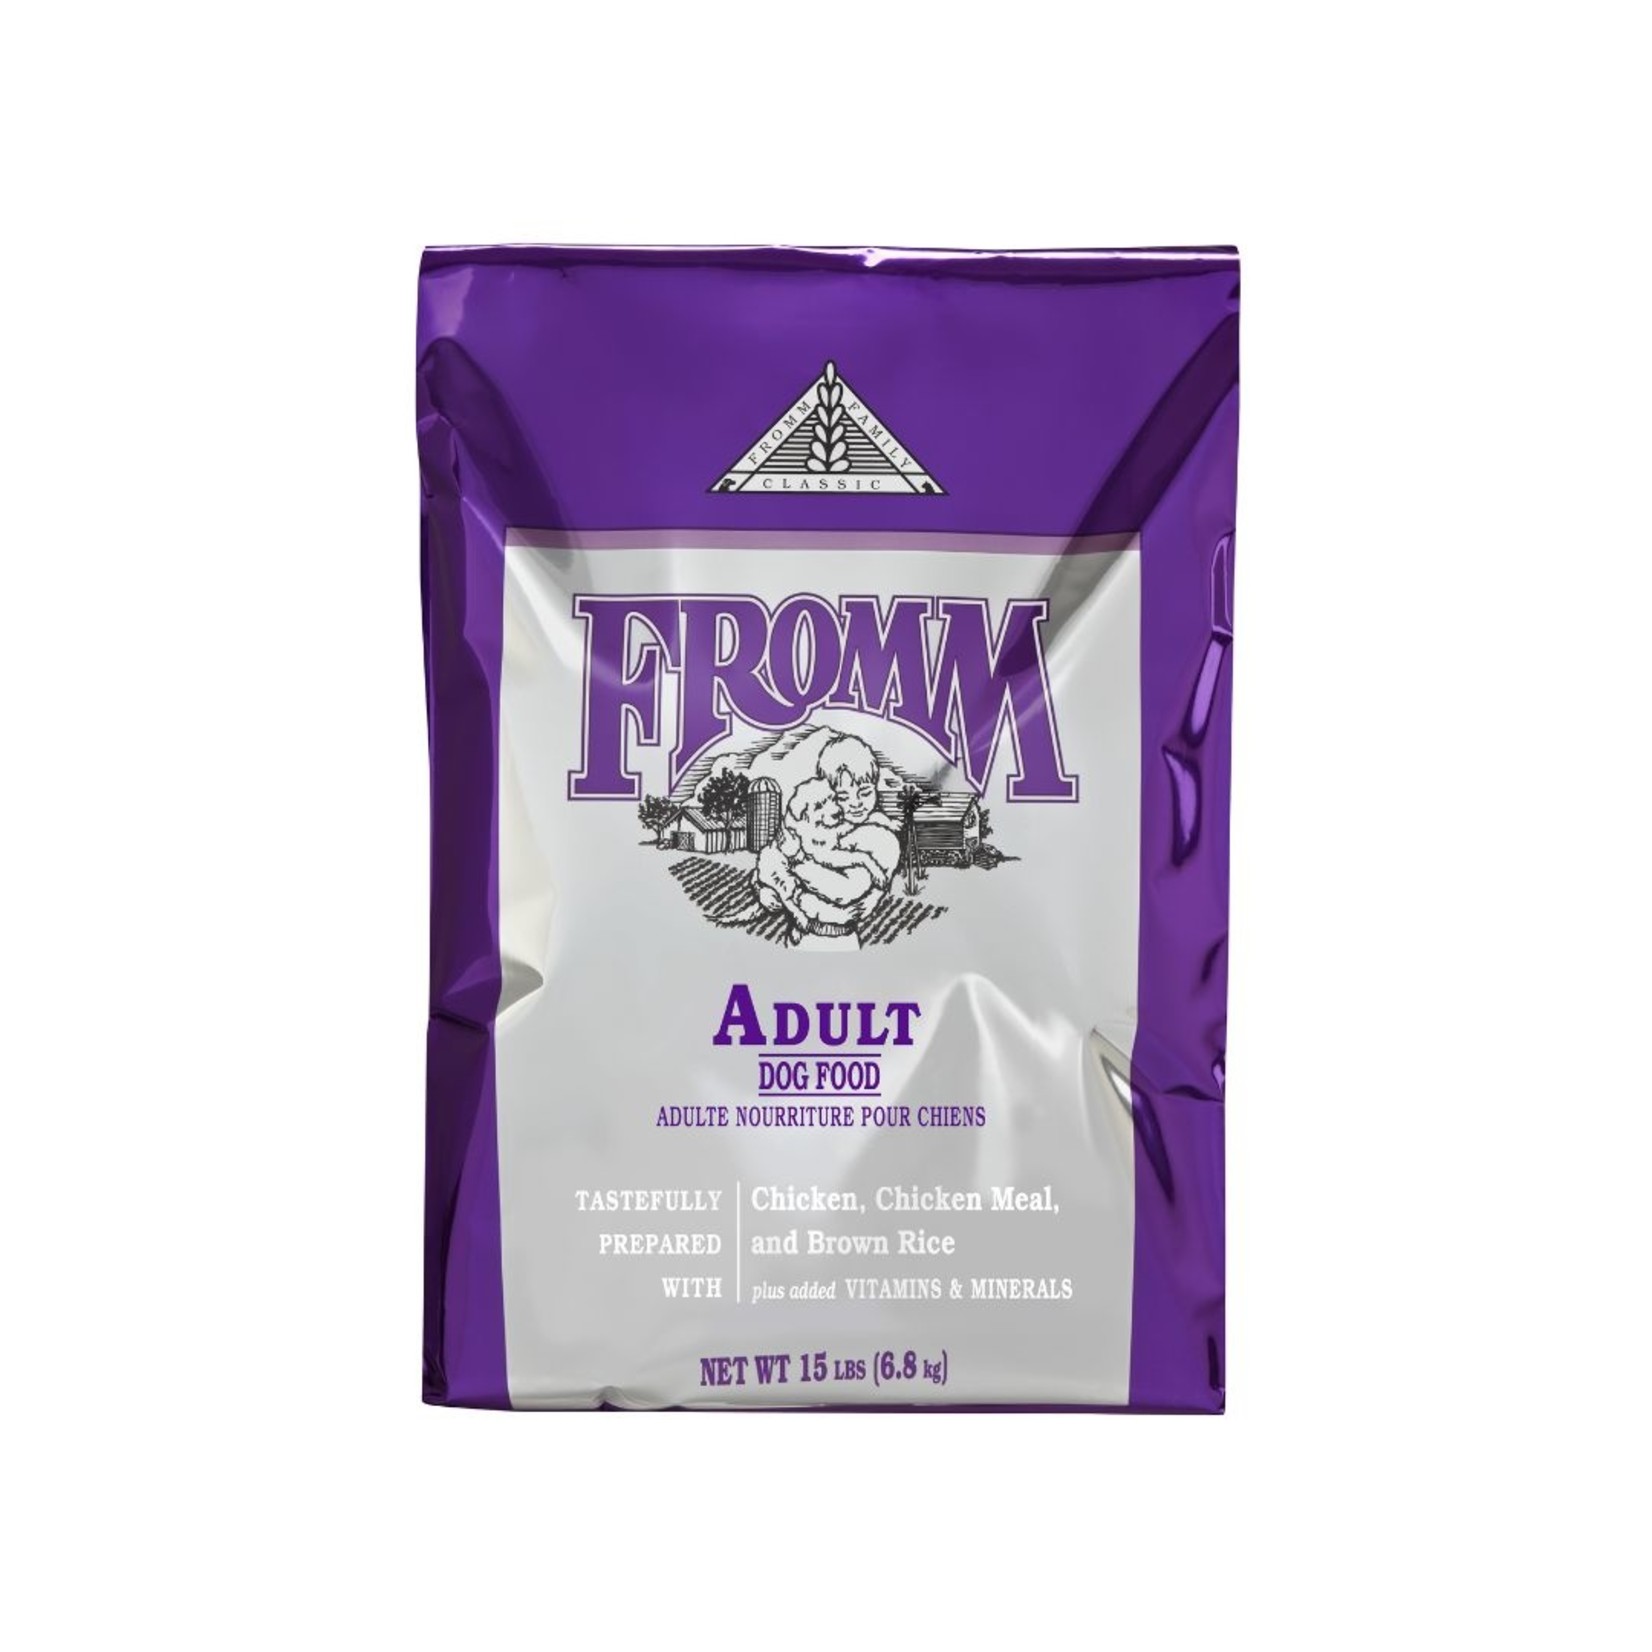 Fromm Fromm Classic Adult